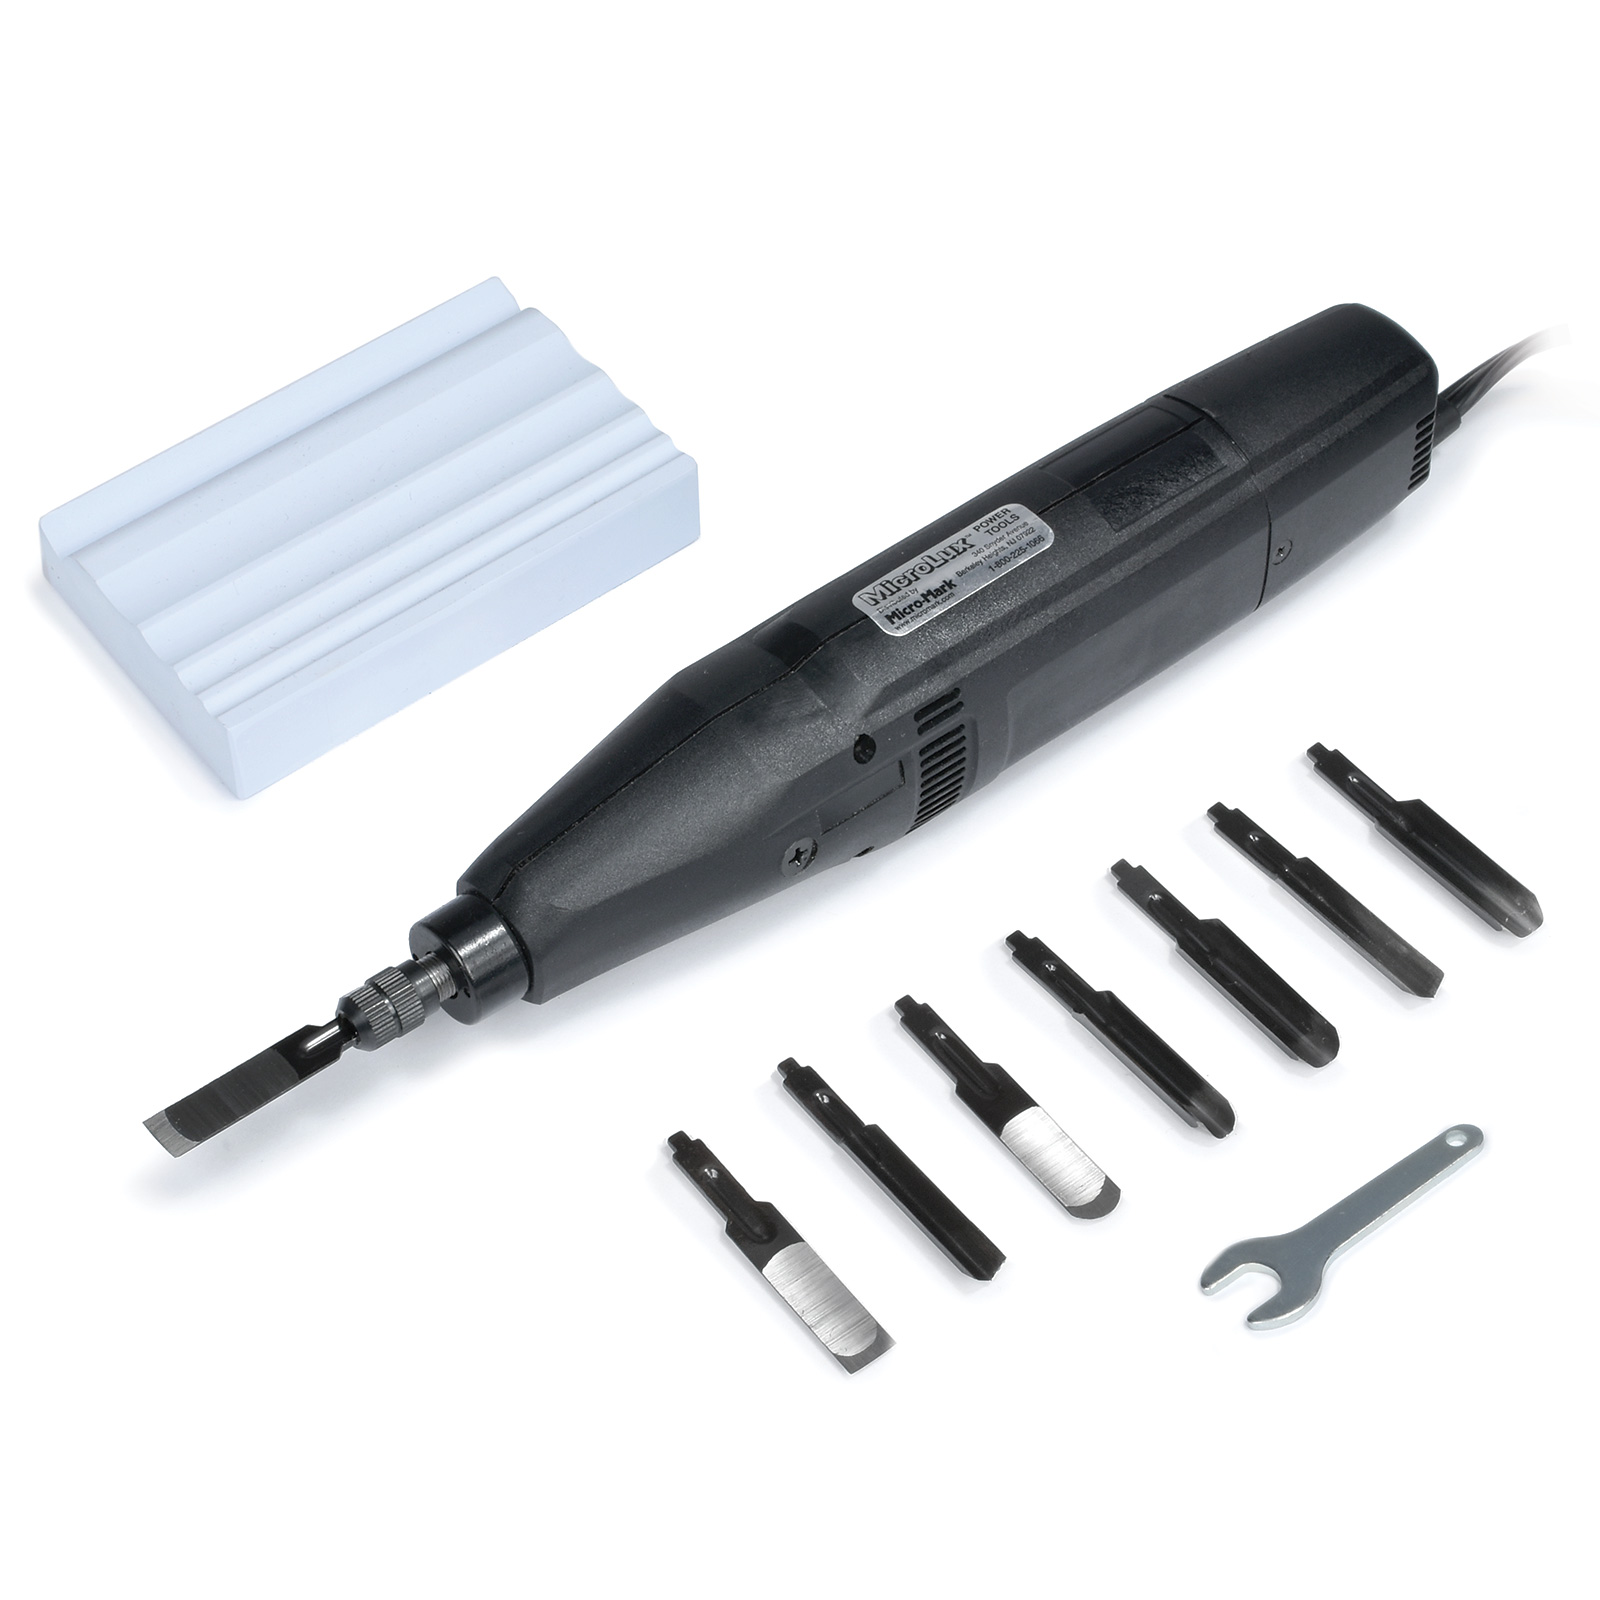 Powered Chisel Super Value Package